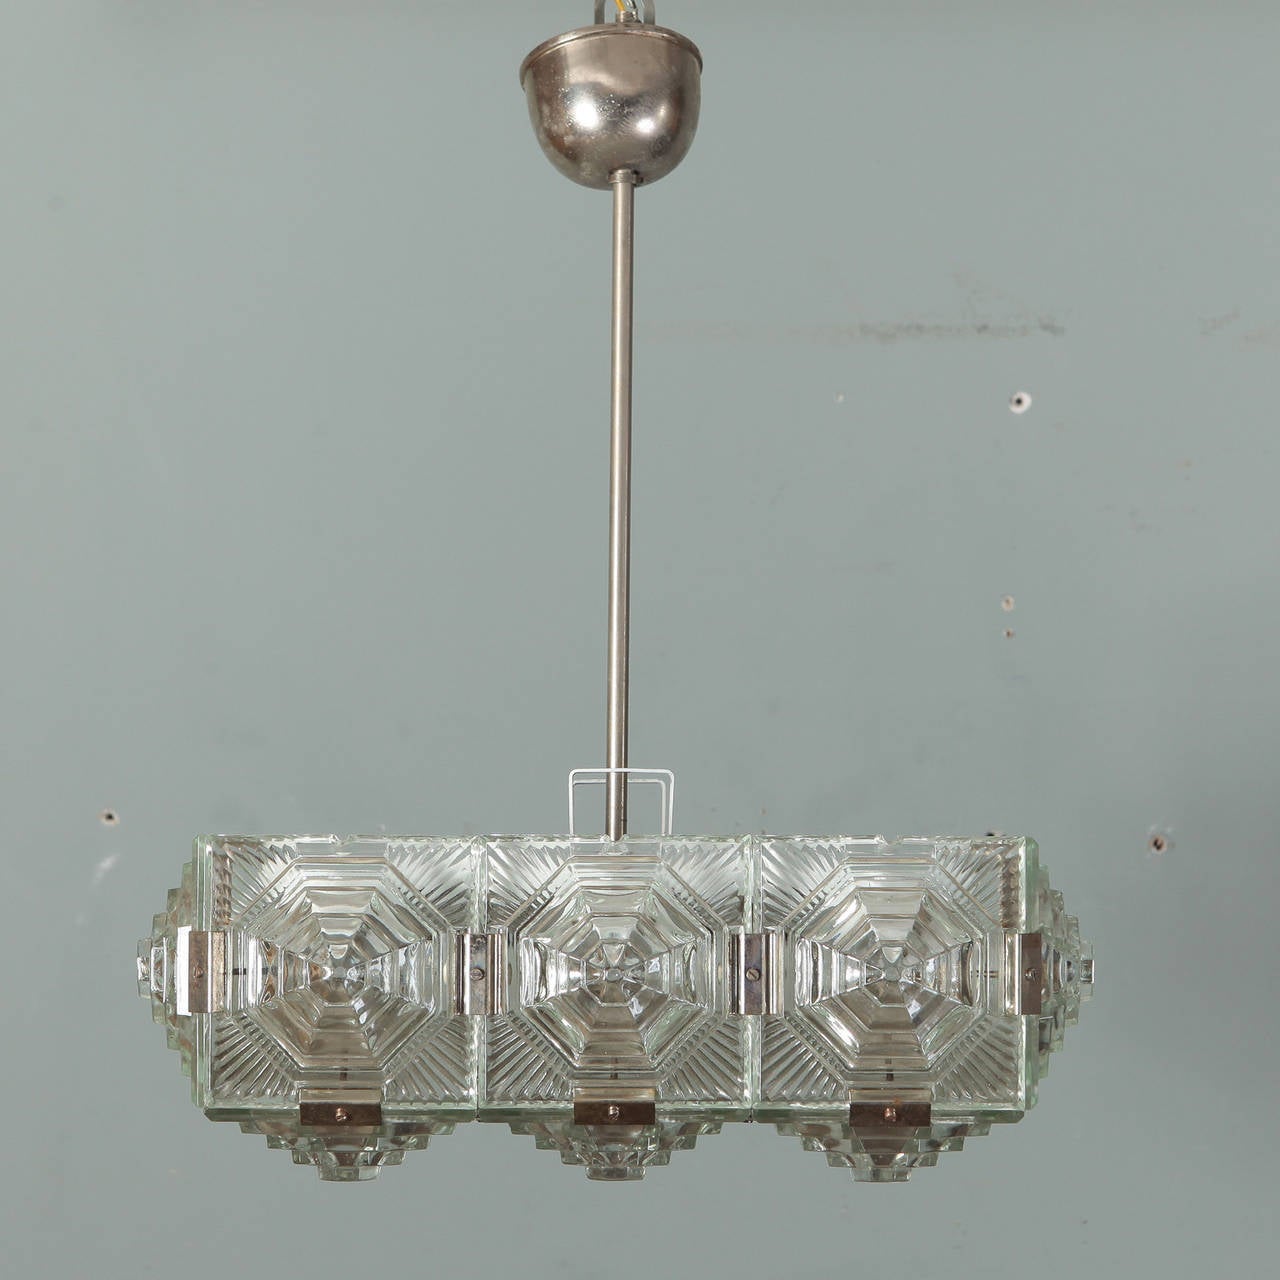 Circa 1970s European hanging light fixture with heavy, clear glass panels. Textured, dimensional glass with octagonal medallions and silver tone metal shaft and ceiling canopy. New wiring for US electrical standards.